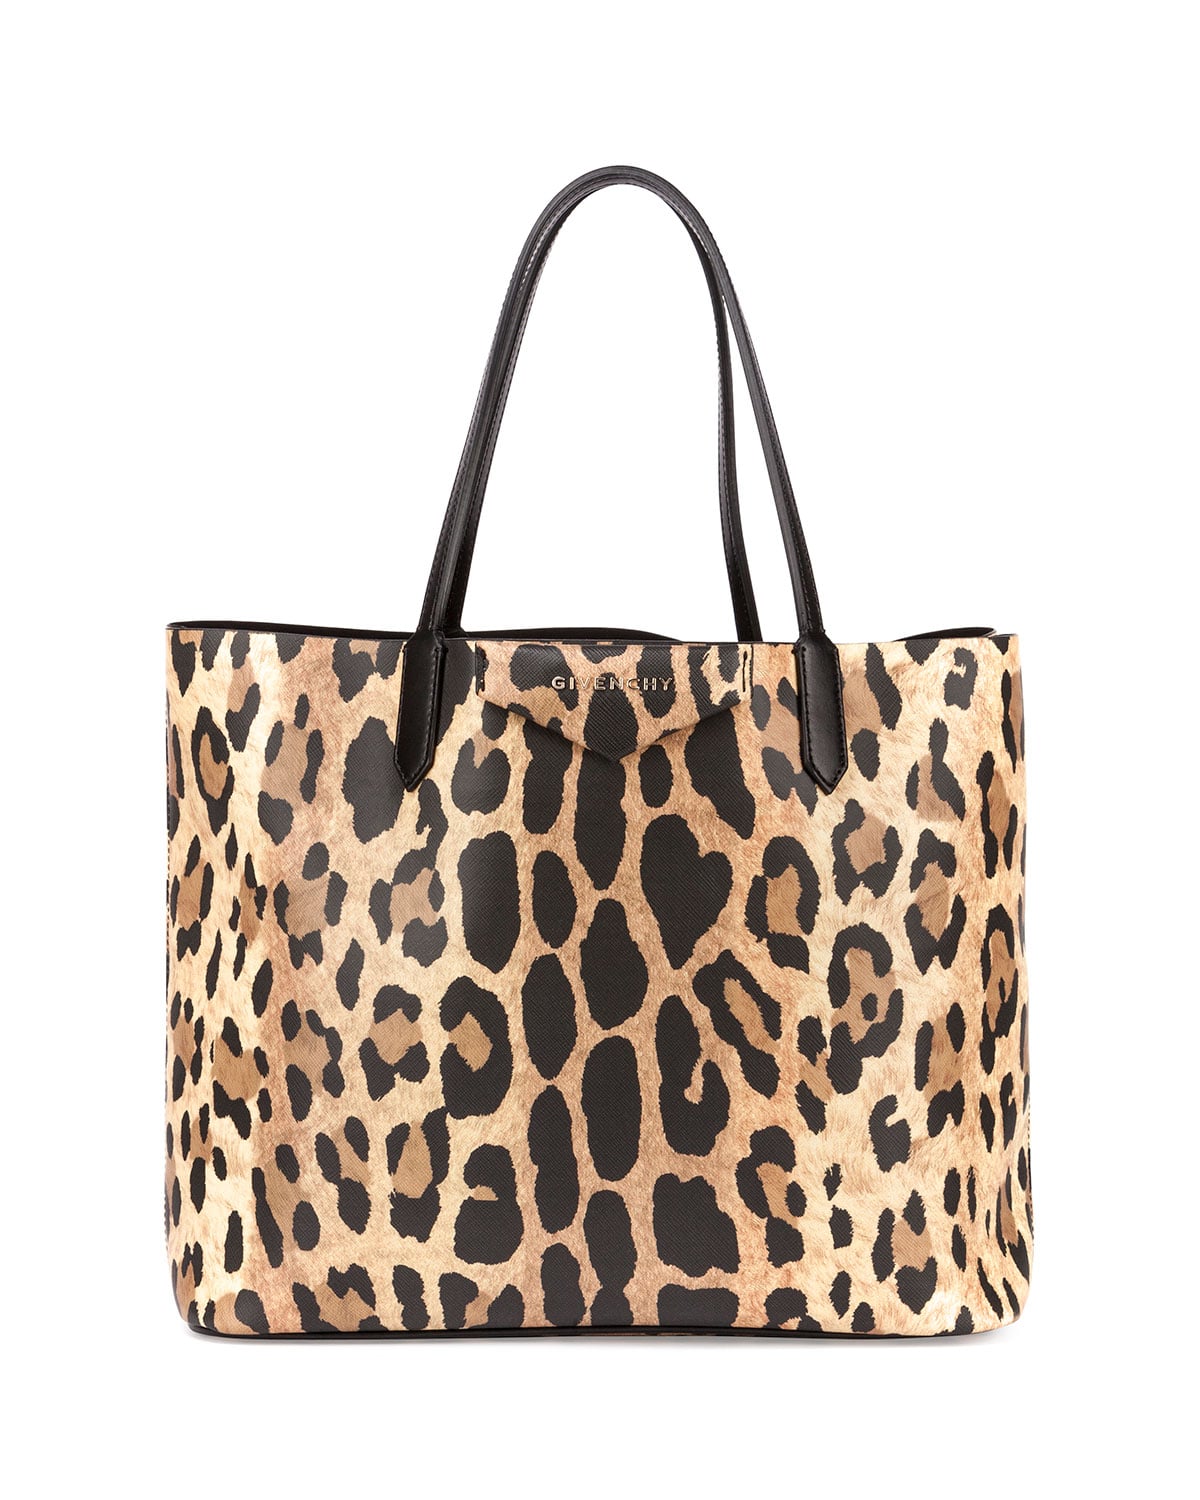 Givenchy Pre-Fall 2015 Bag Collection featuring Leopard Prints ...